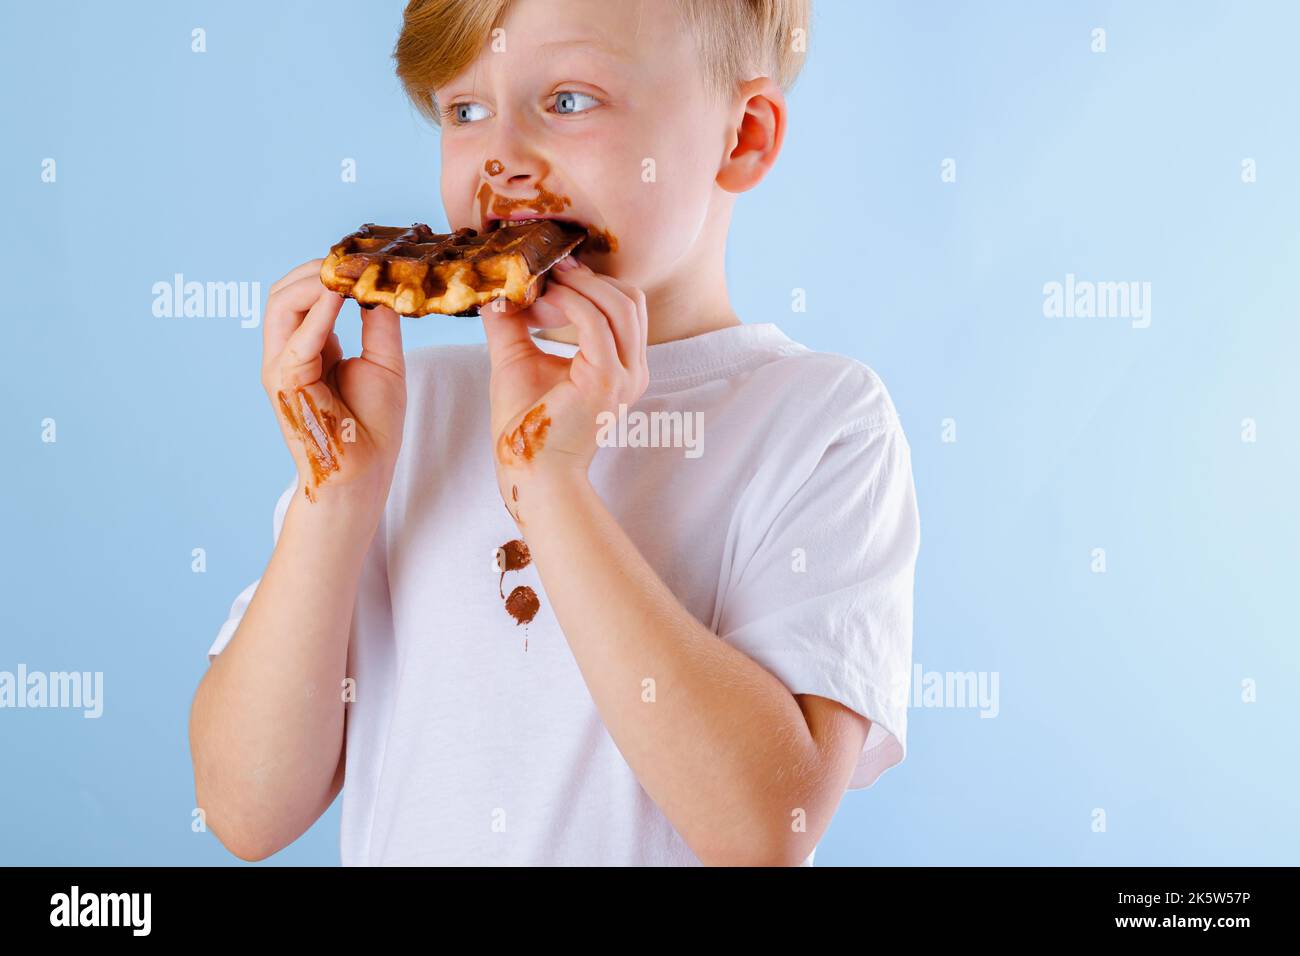 The child is eating Belgian waffle with chocolate sauce on a blue background. Dirty chocolate stains on clothes and hands Stock Photo